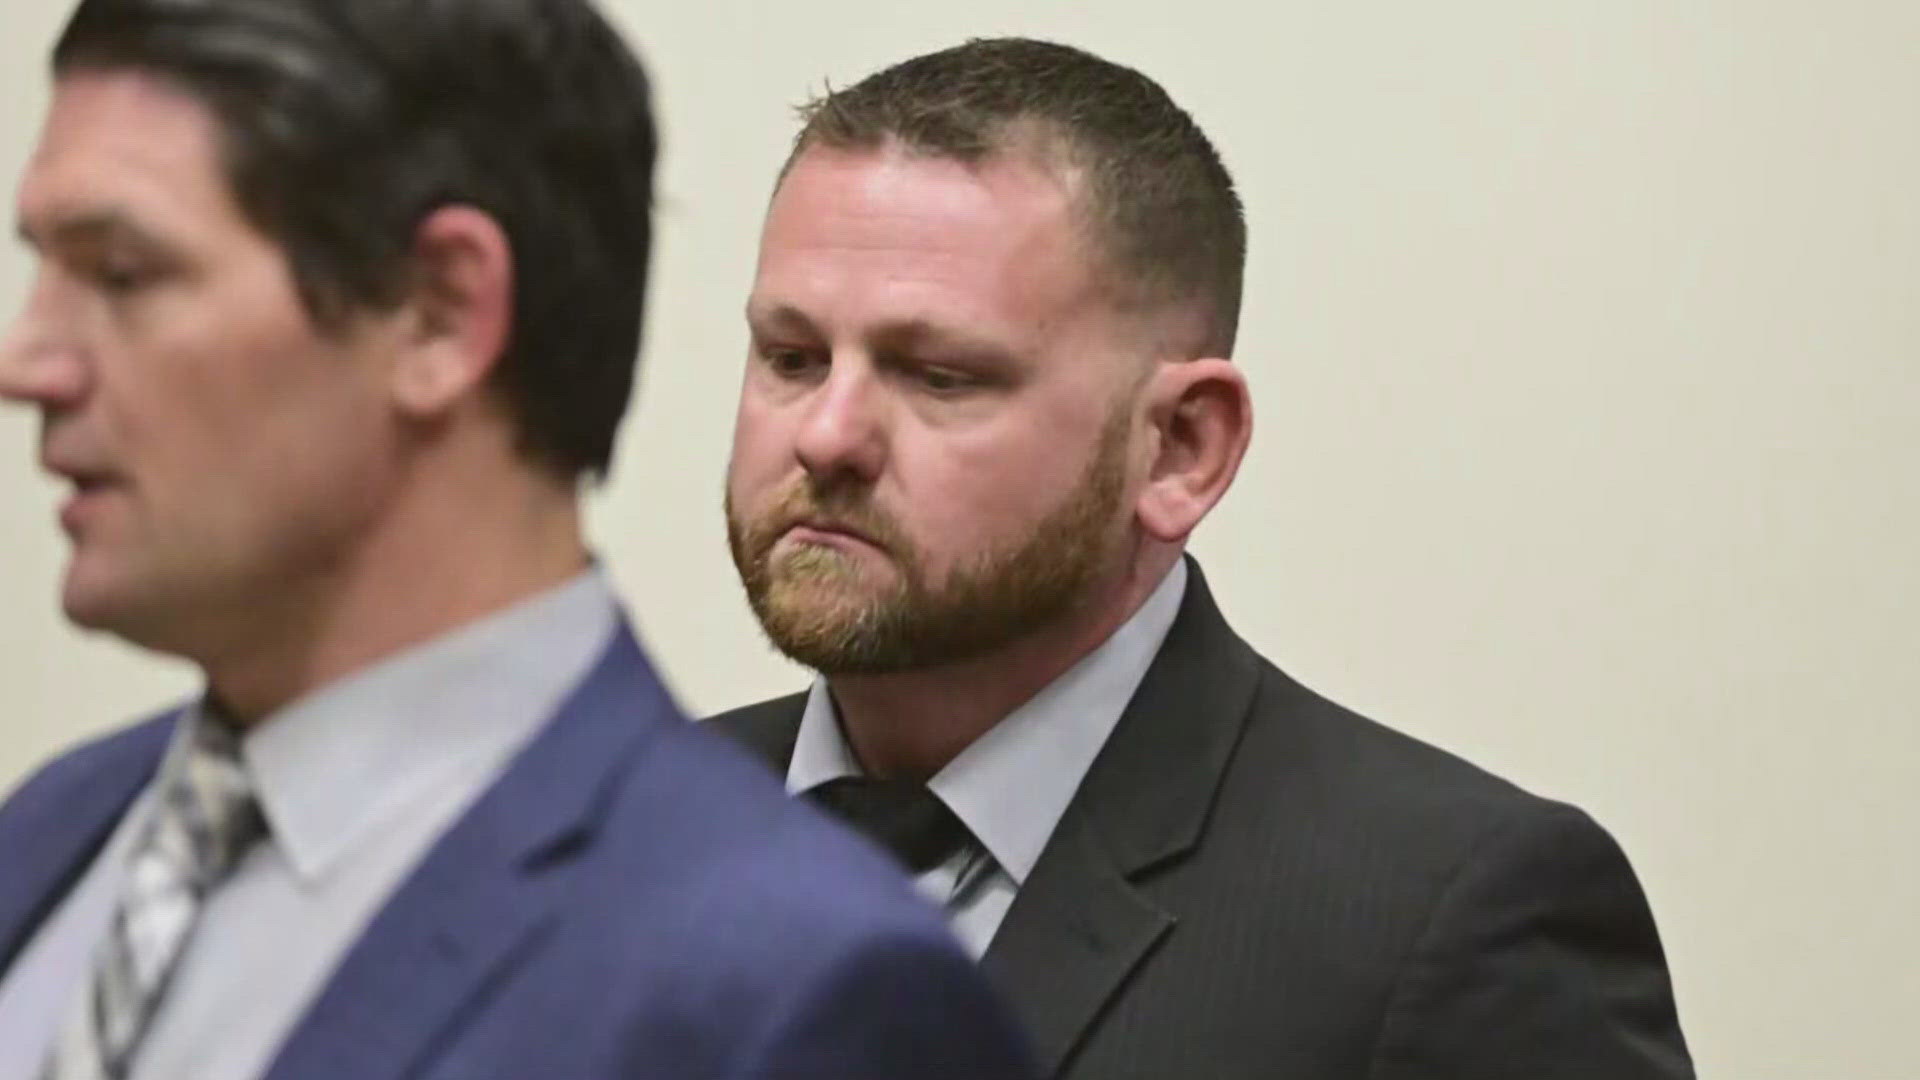 Former Aurora officer Randy Roedema was sentenced to a jail work-release program. His attorneys said he fears “physical attacks” and suffers from anxiety.